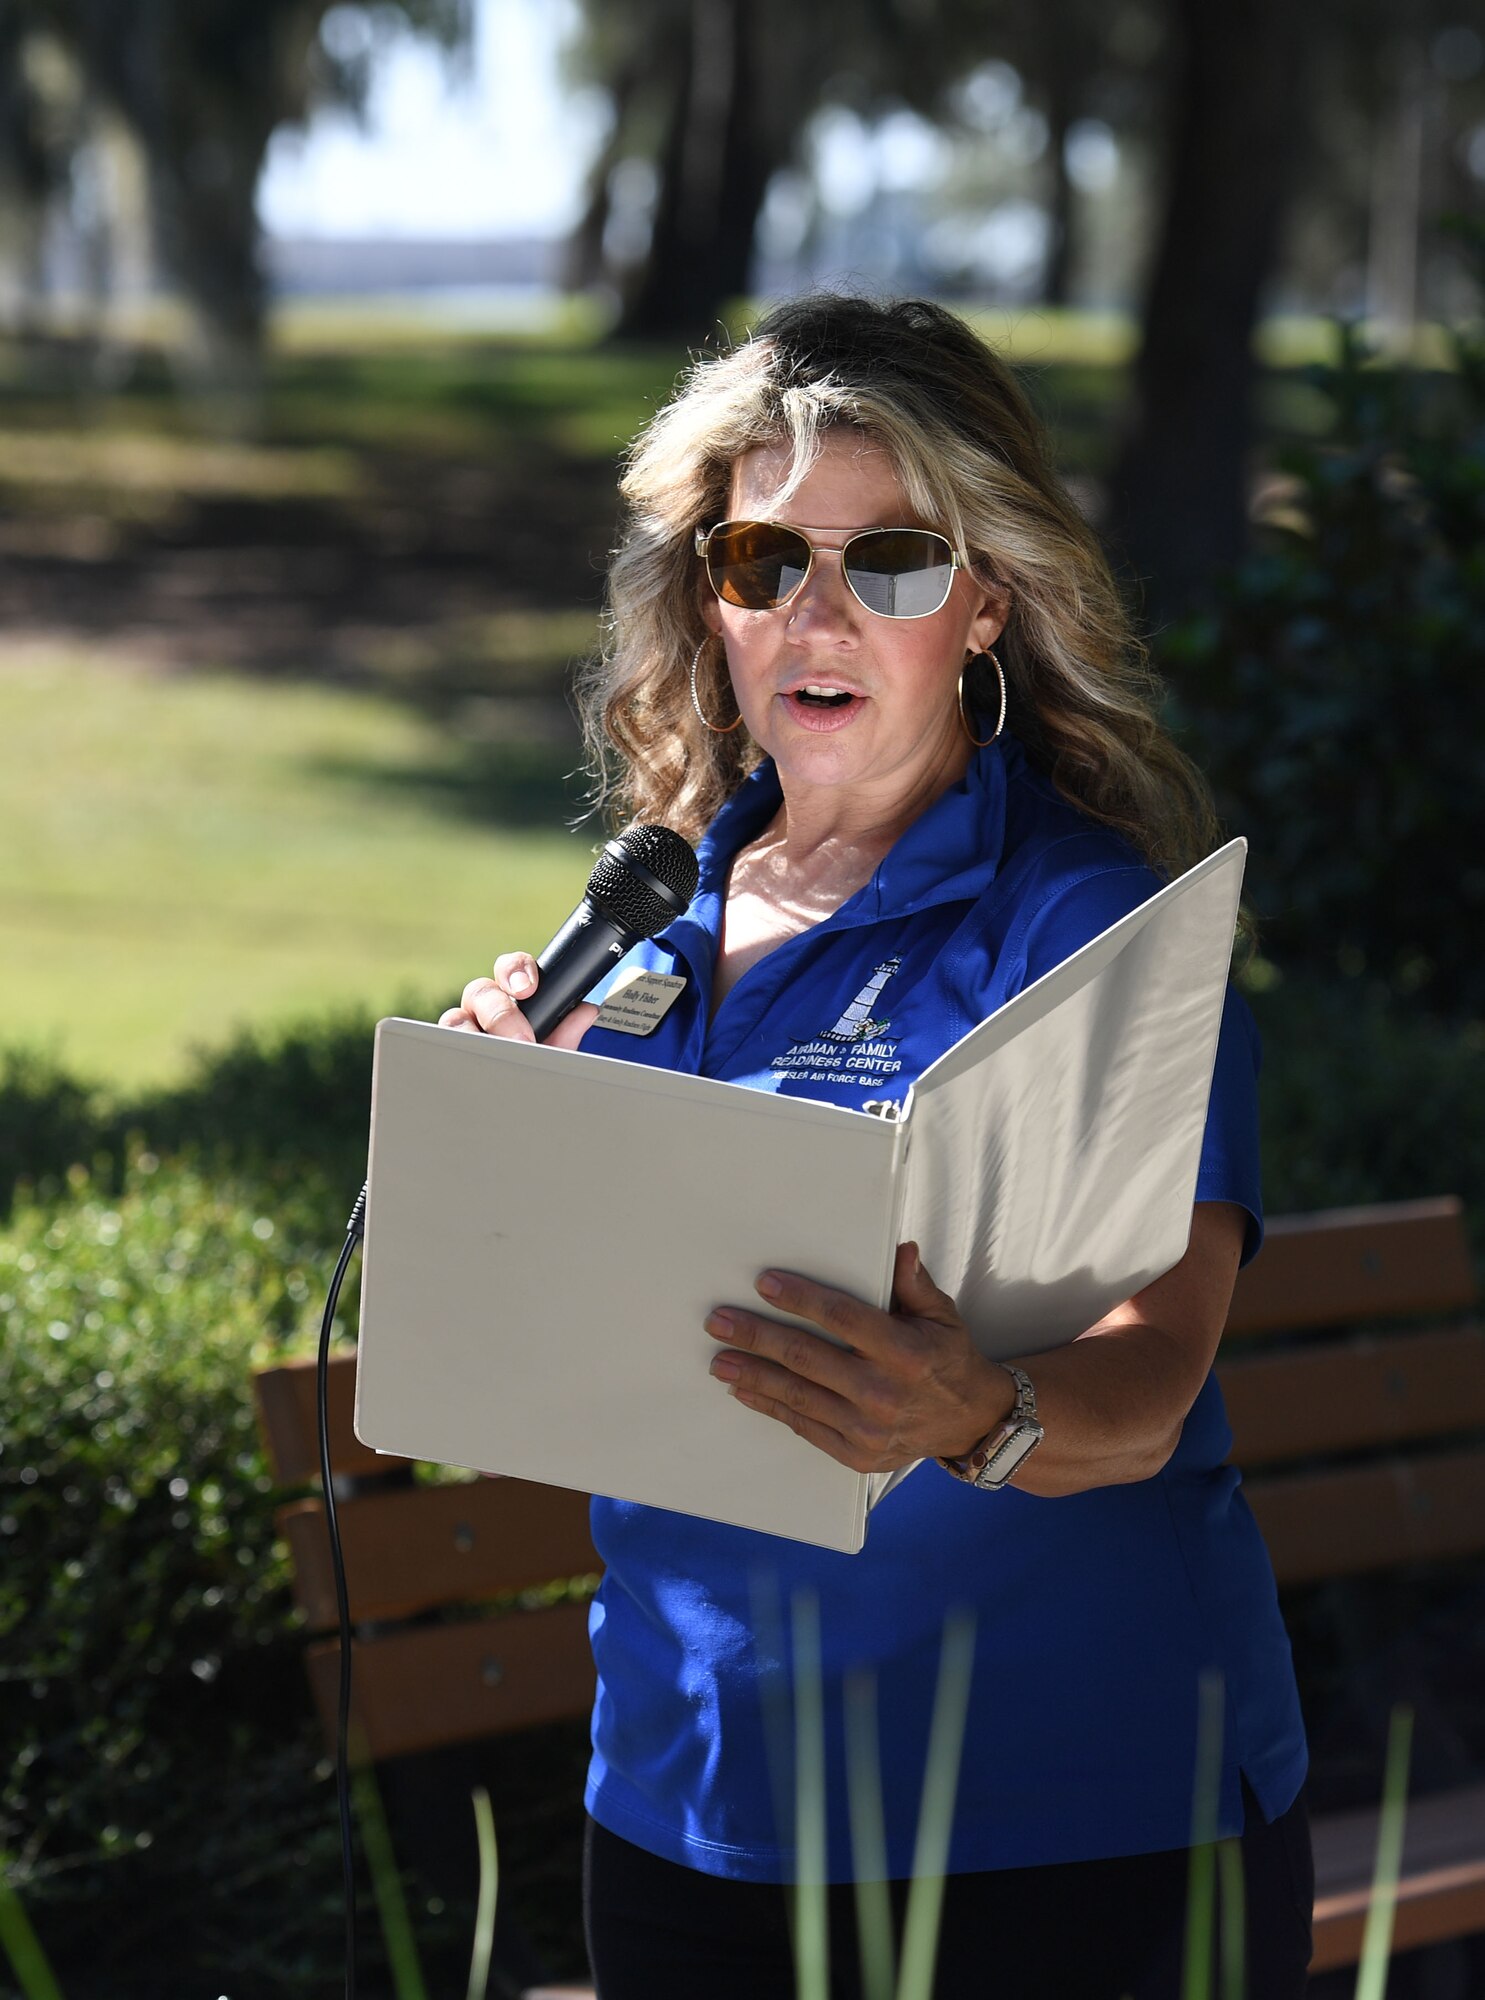 Holly Fisher, 81st Force Support Squadron employment specialist, delivers remarks during the Air Force Families Forever Fallen Hero Butterfly Release at the marina park at Keesler Air Force Base, Mississippi, Sept. 23, 2022. The garden serves as a designated location where the families of our fallen heroes can find a serene area to pay tribute to their loved one as well as honoring our fallen service members. (U.S. Air Force photo by Kemberly Groue)